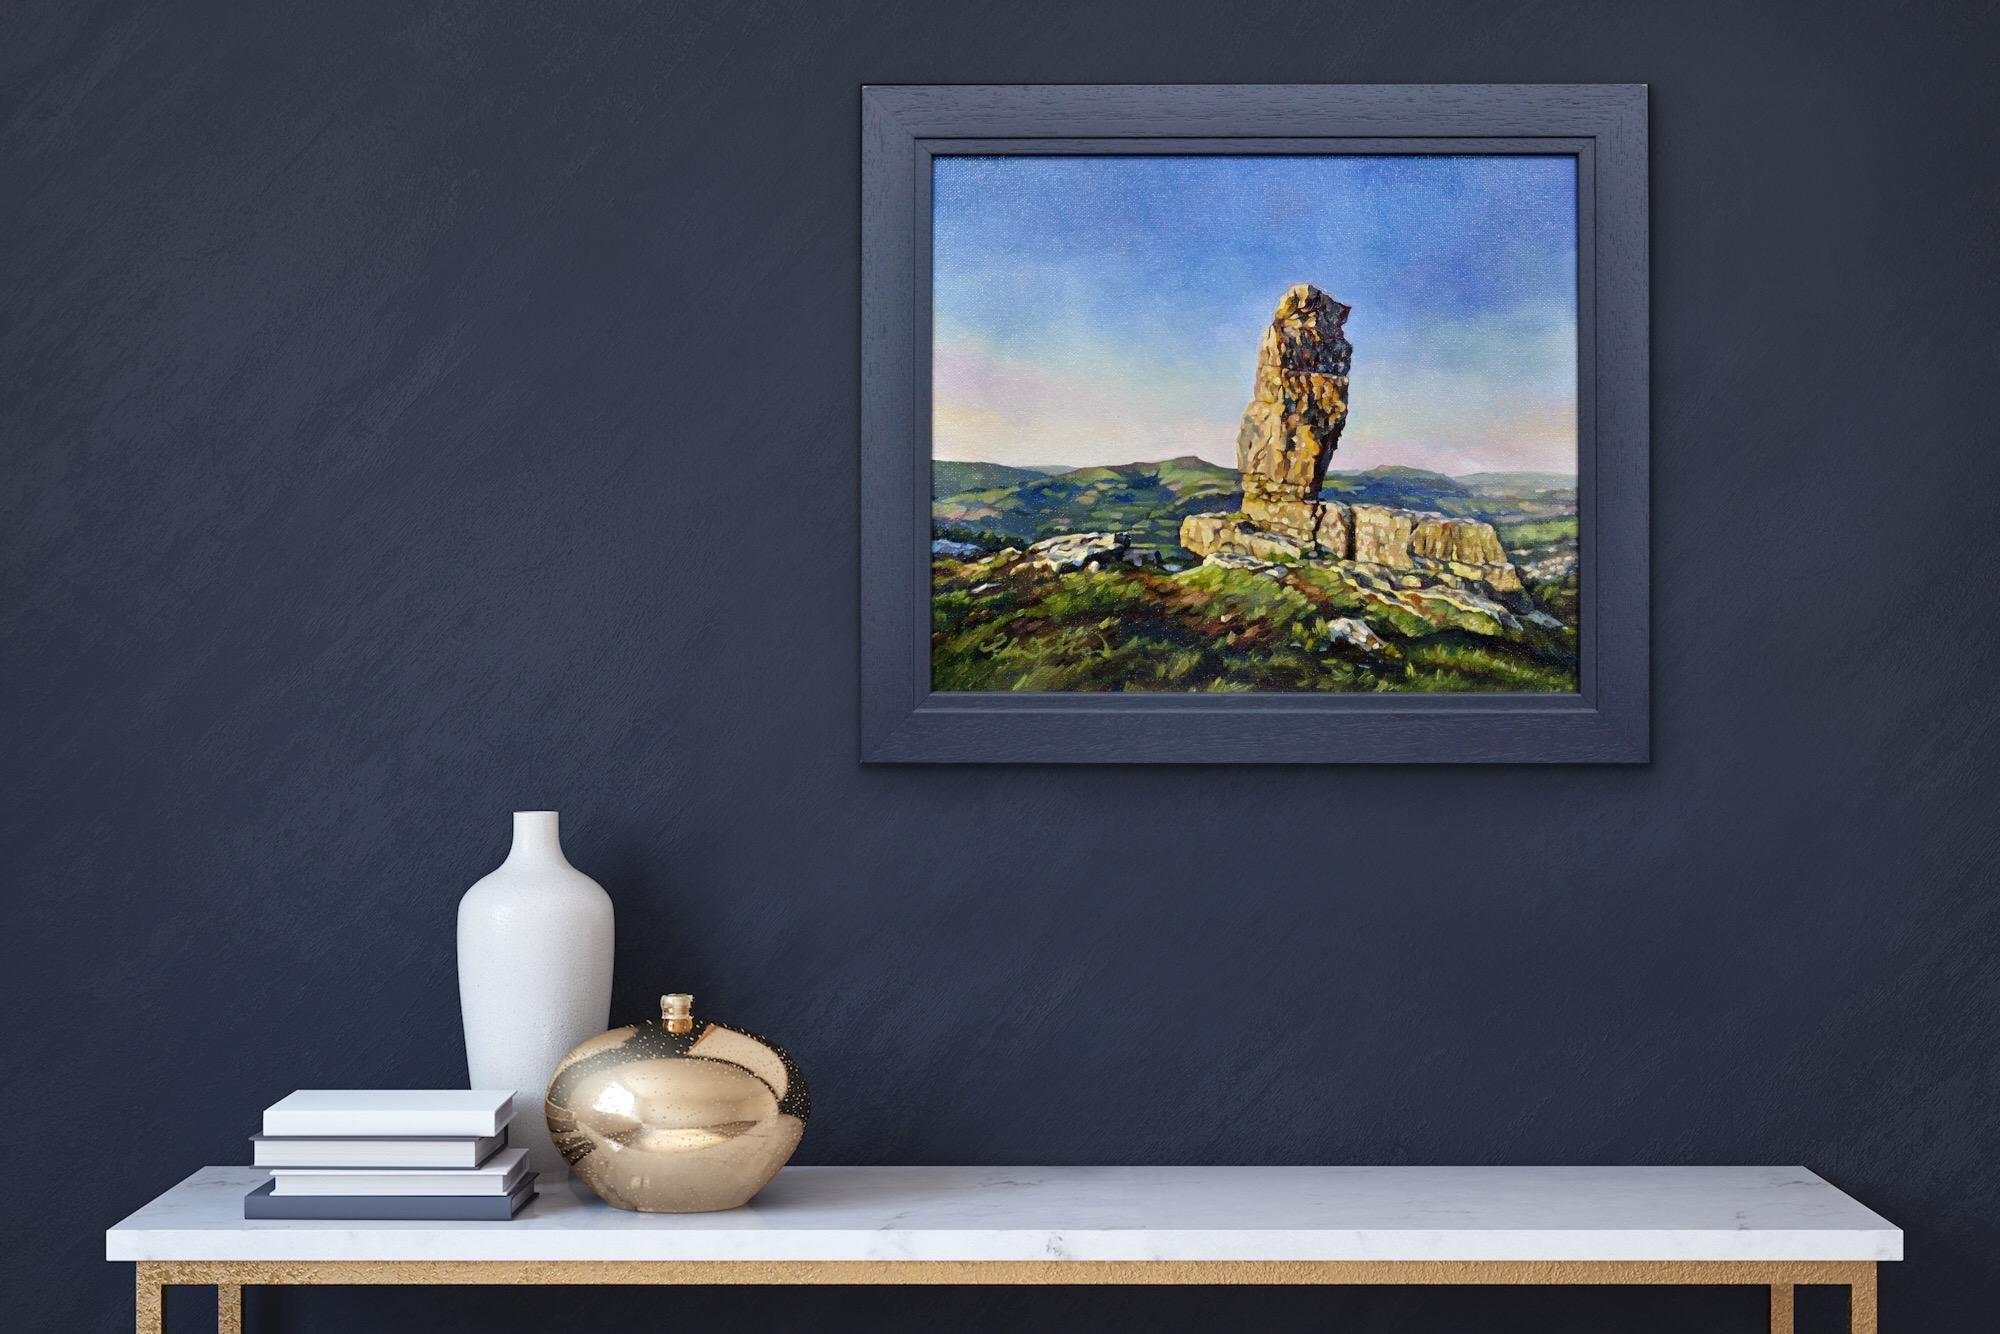 Y Bugail Unig (The Lonely Shepherd), Llangattock, Brecon Beacons. Welsh Folklore For Sale 7